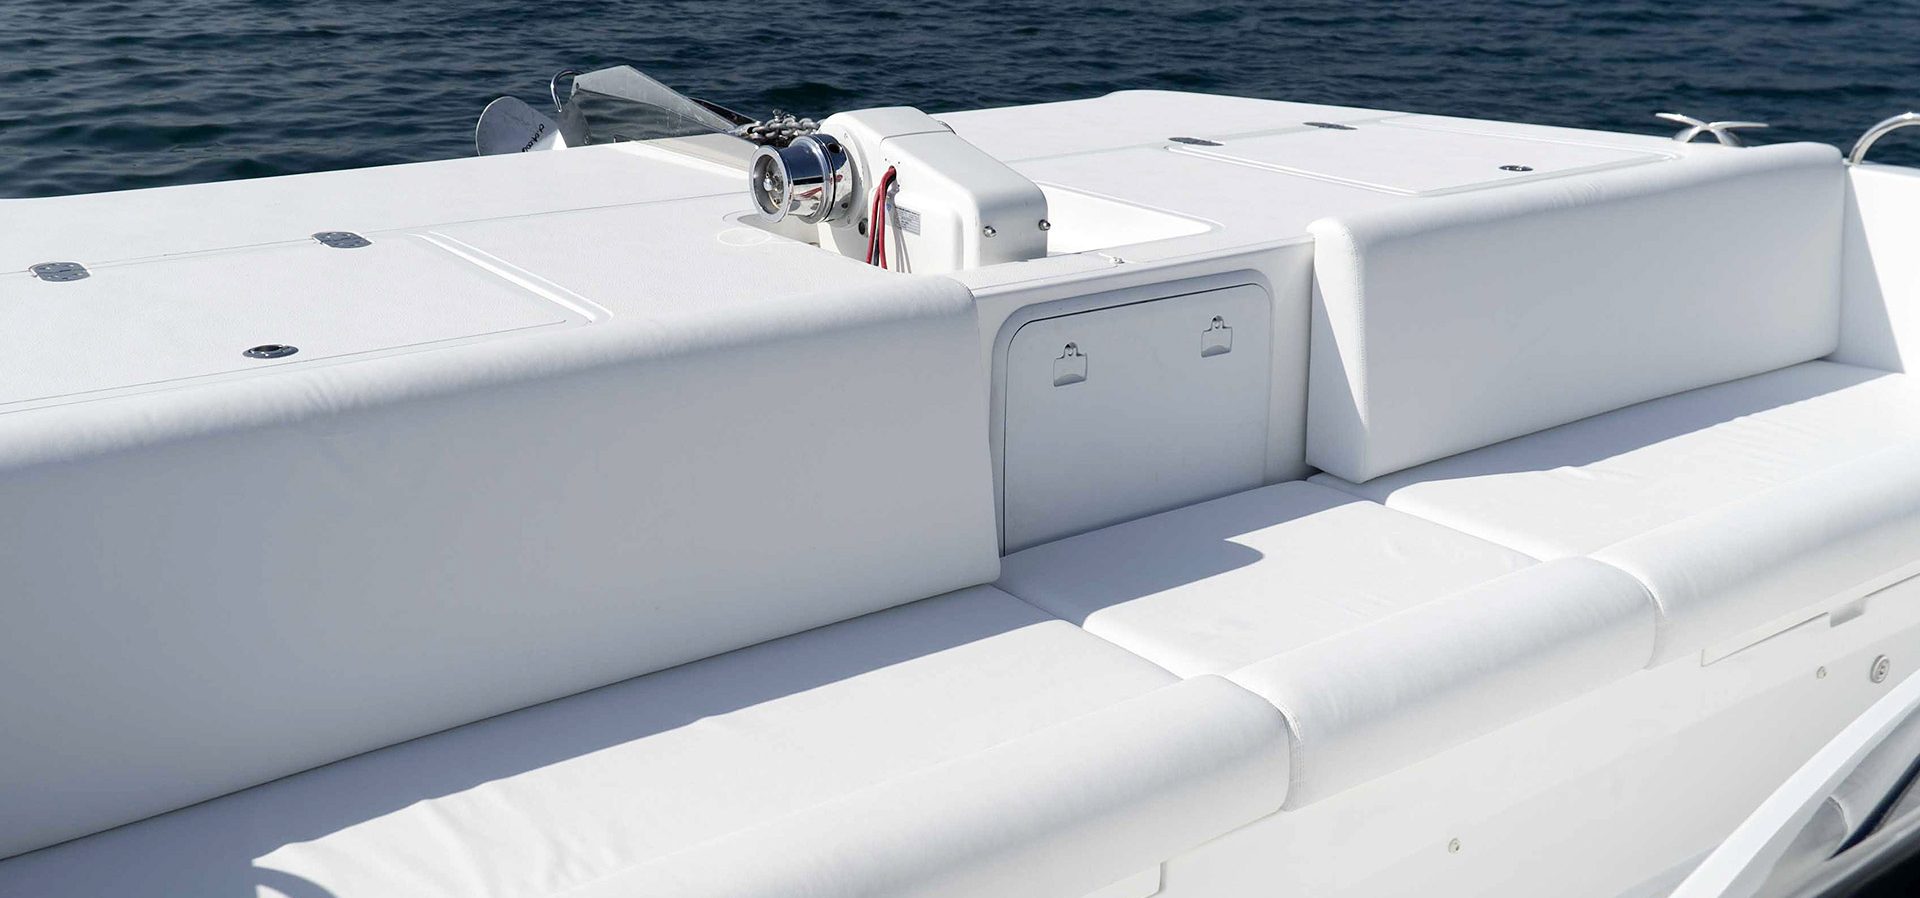 SilverCat 40 LUX - Bow Seating Area